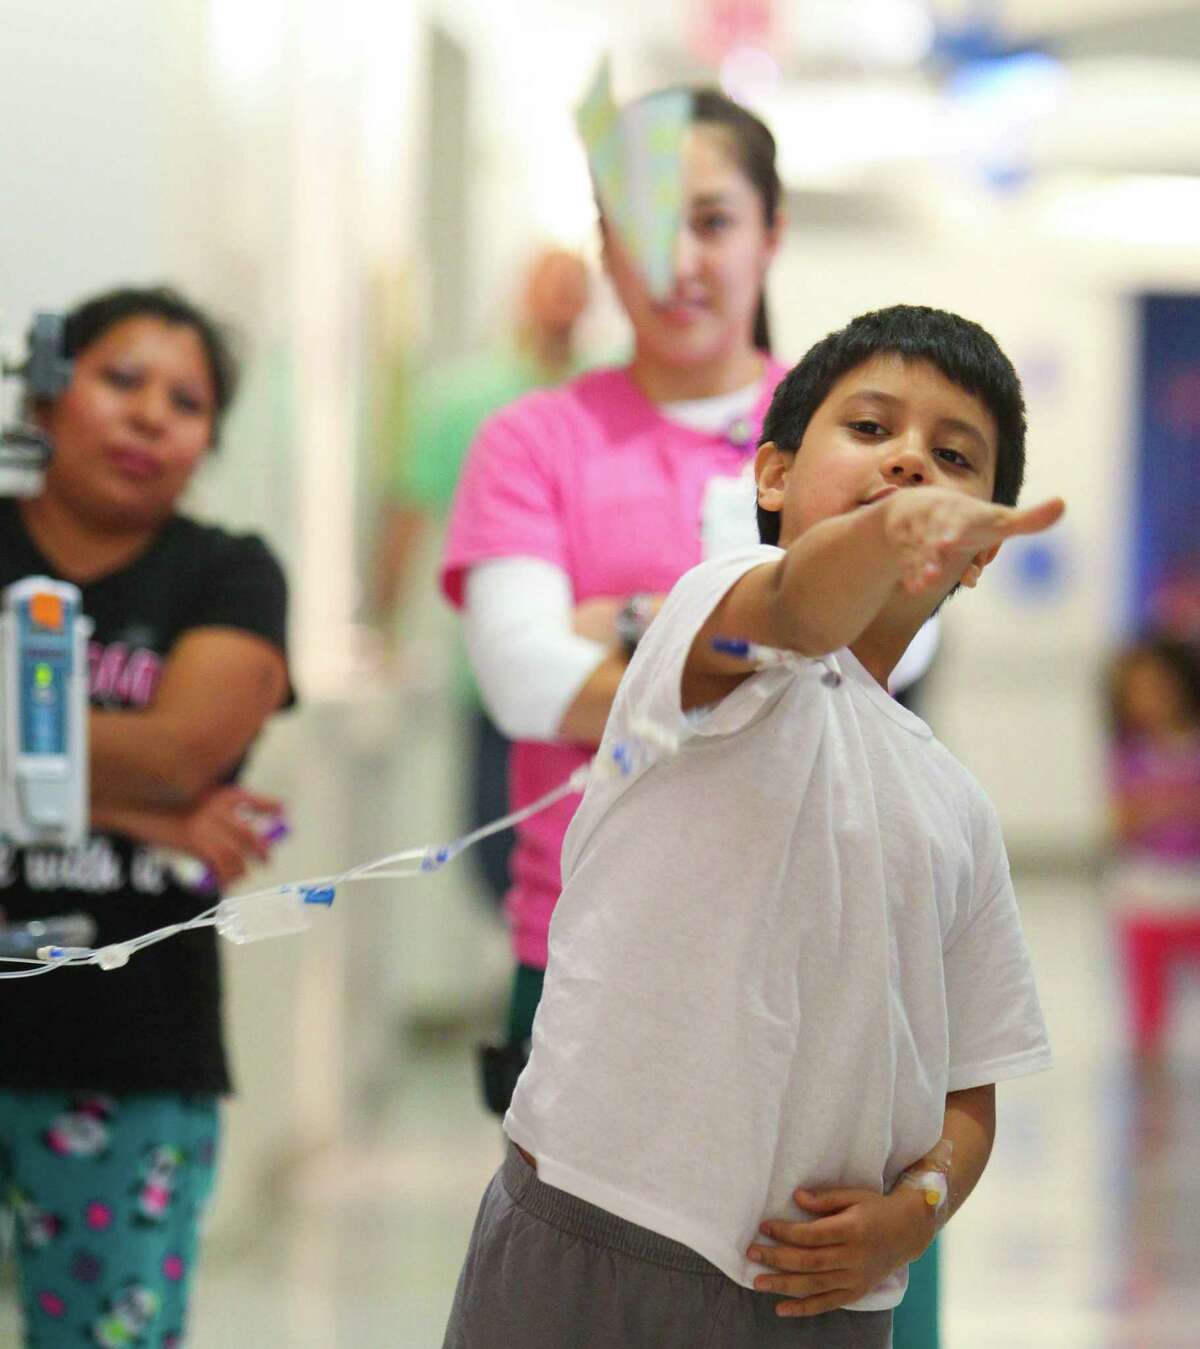 Eight year-old Leonardo Sandoval sees how long his paper plane can fly during the paper airplane challenge event in Texas Children's Hospital Winter Olympics.